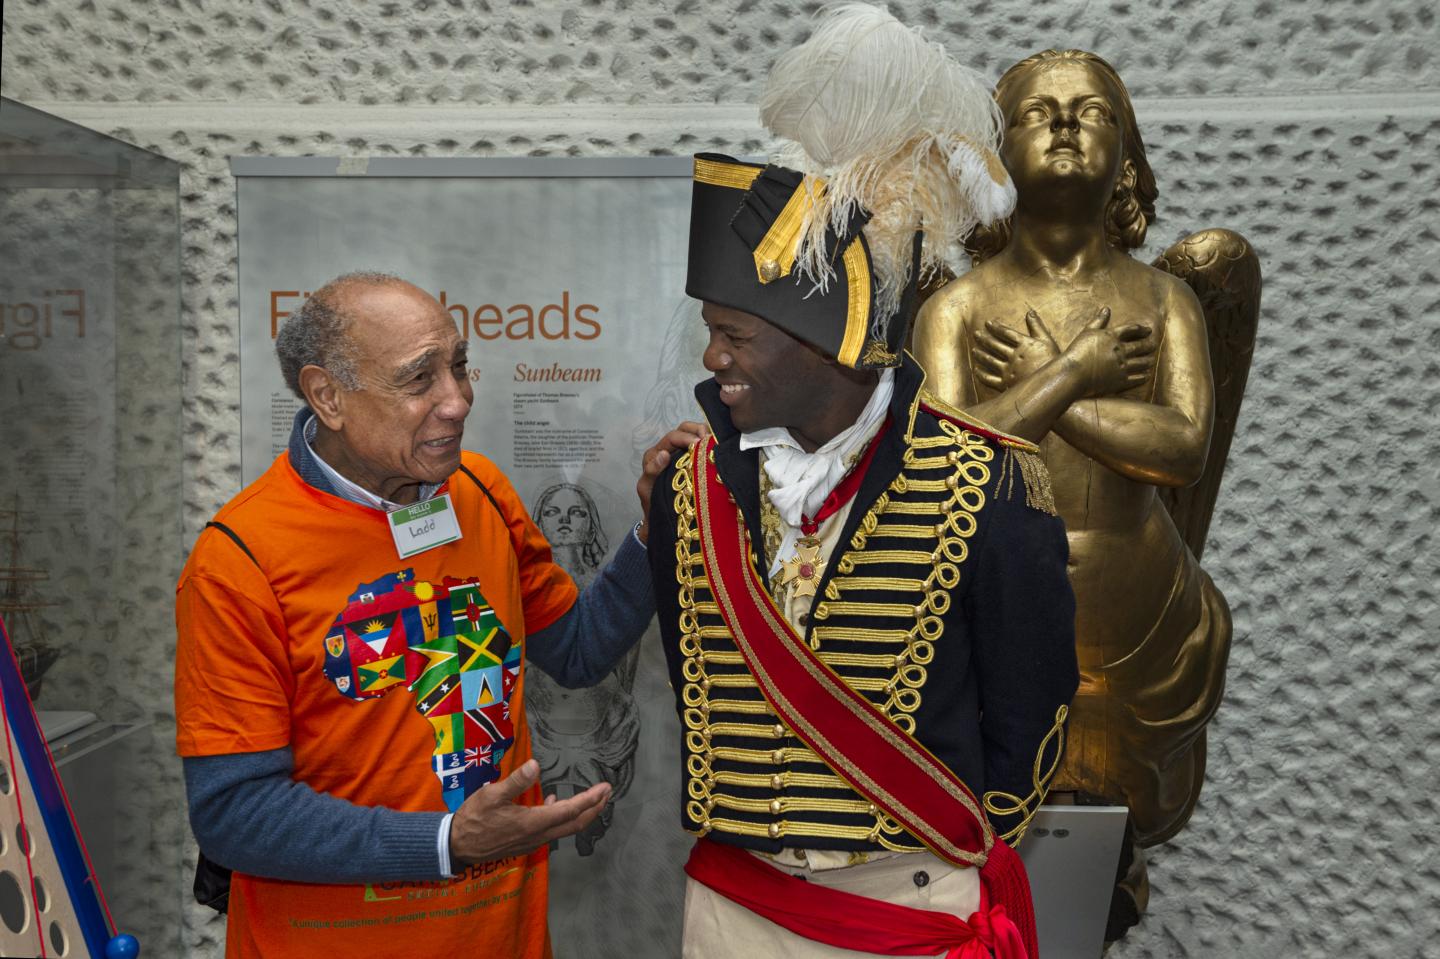 A man dressed in a historical uniform laughs with a man dressed normally in front of a ship figurehead